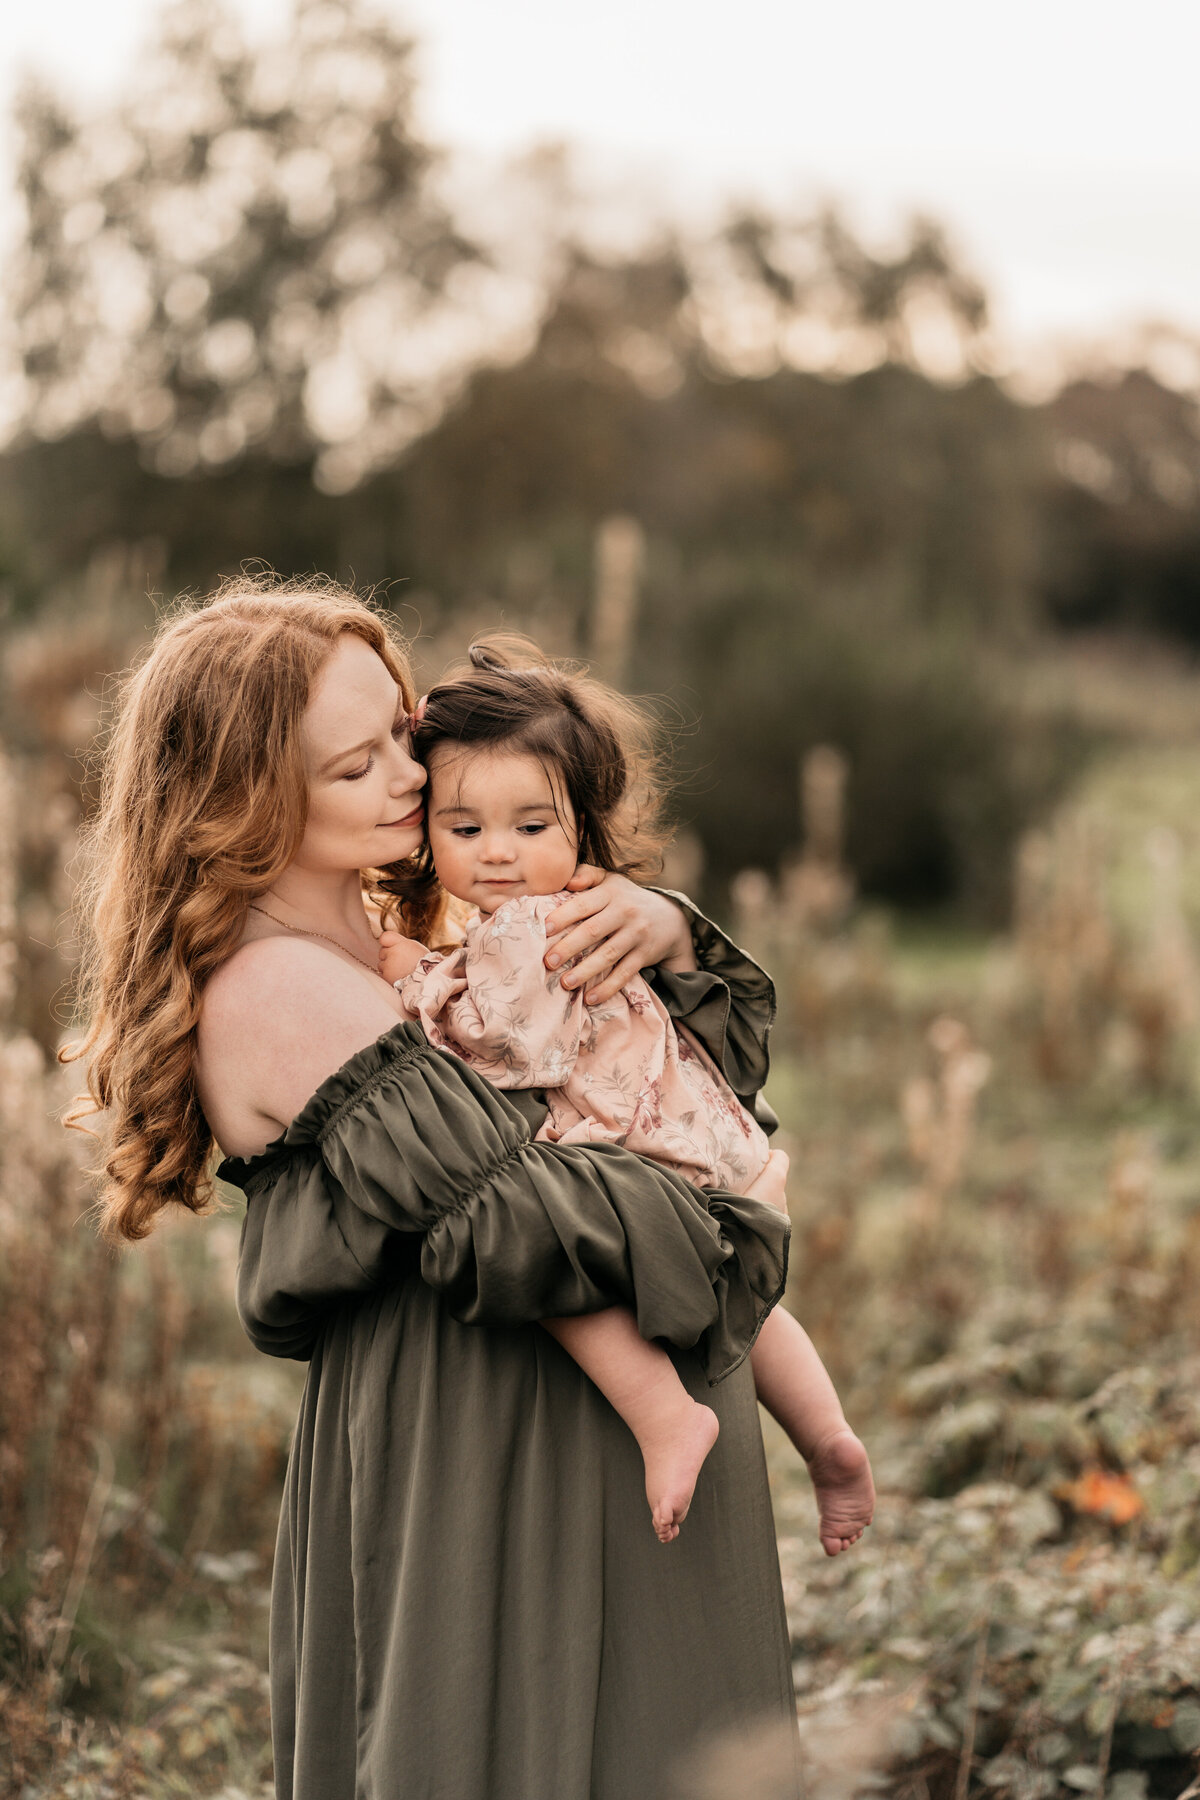 Photo of a pregnant woman in a green dress holding her daughter